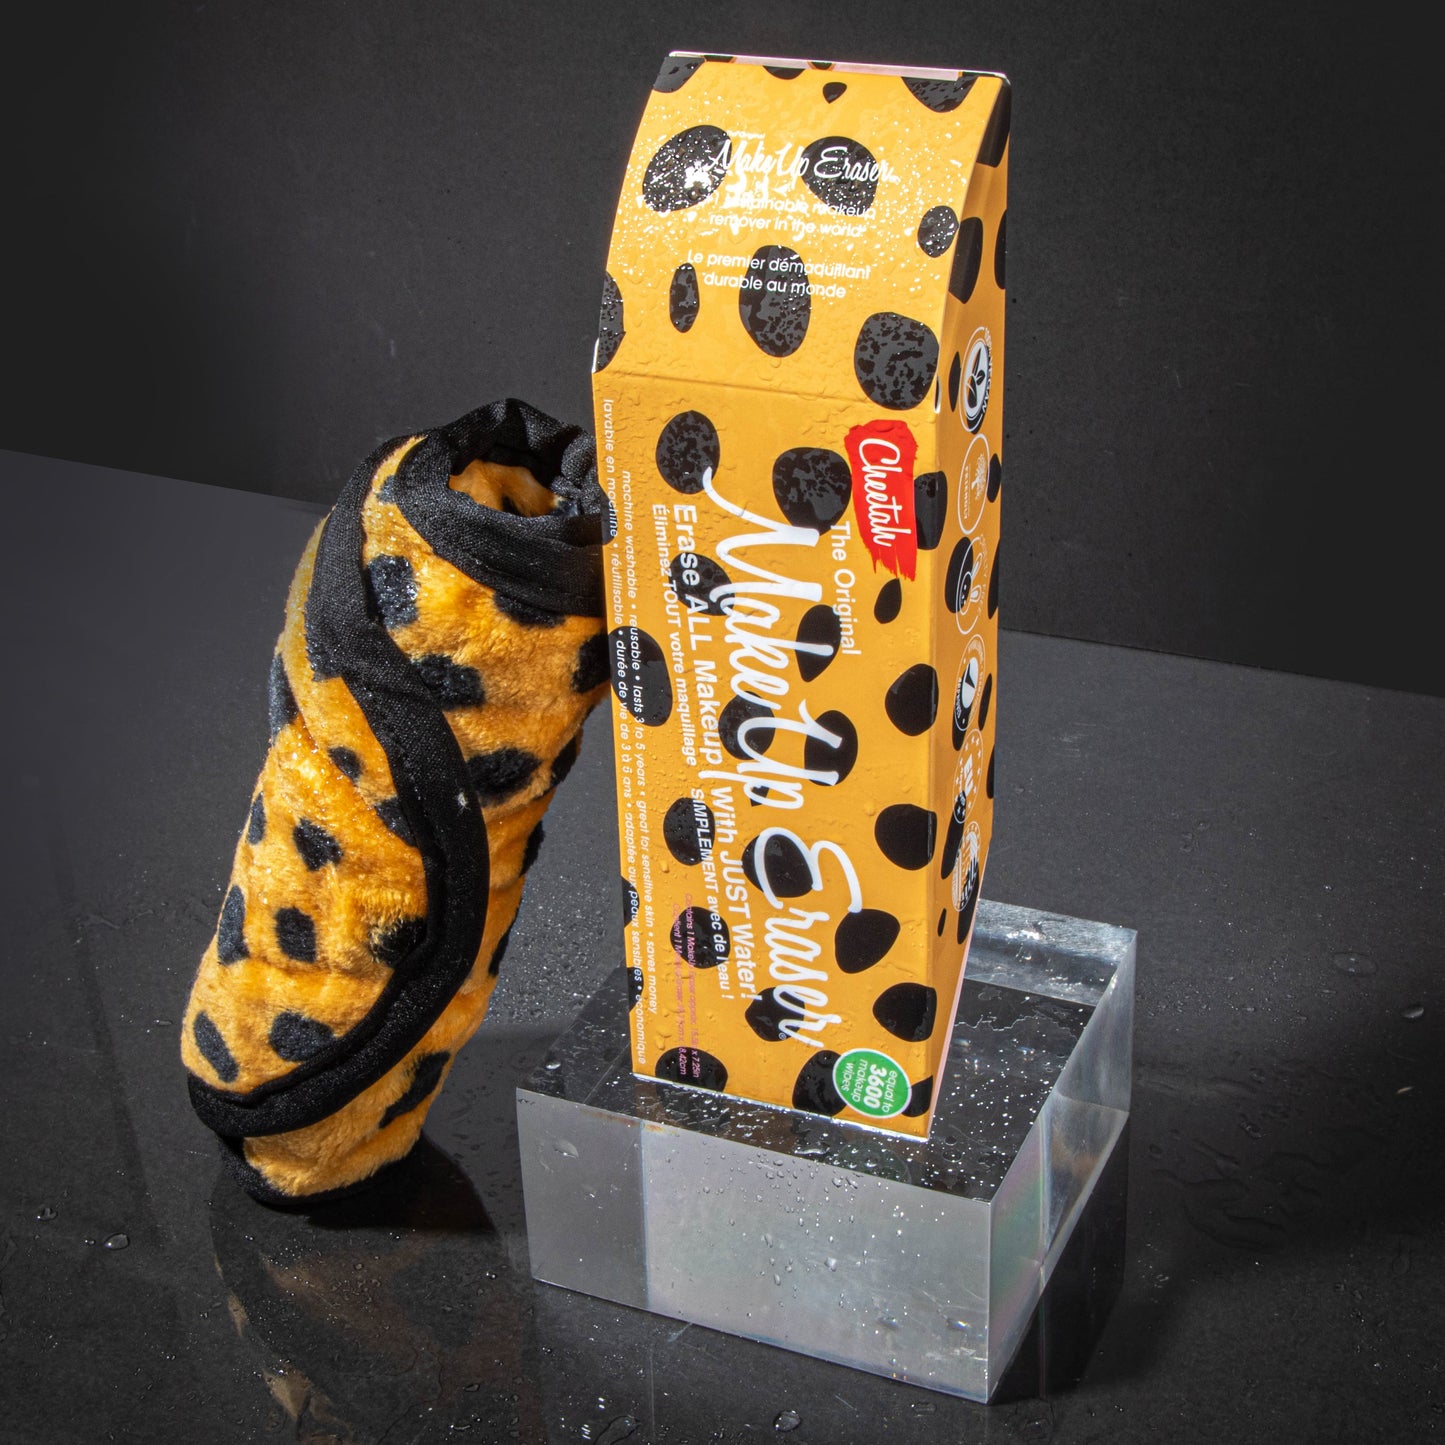 Rolled up Cheetah Print MakeUp Eraser next to packaging surrounded by waterdrops.